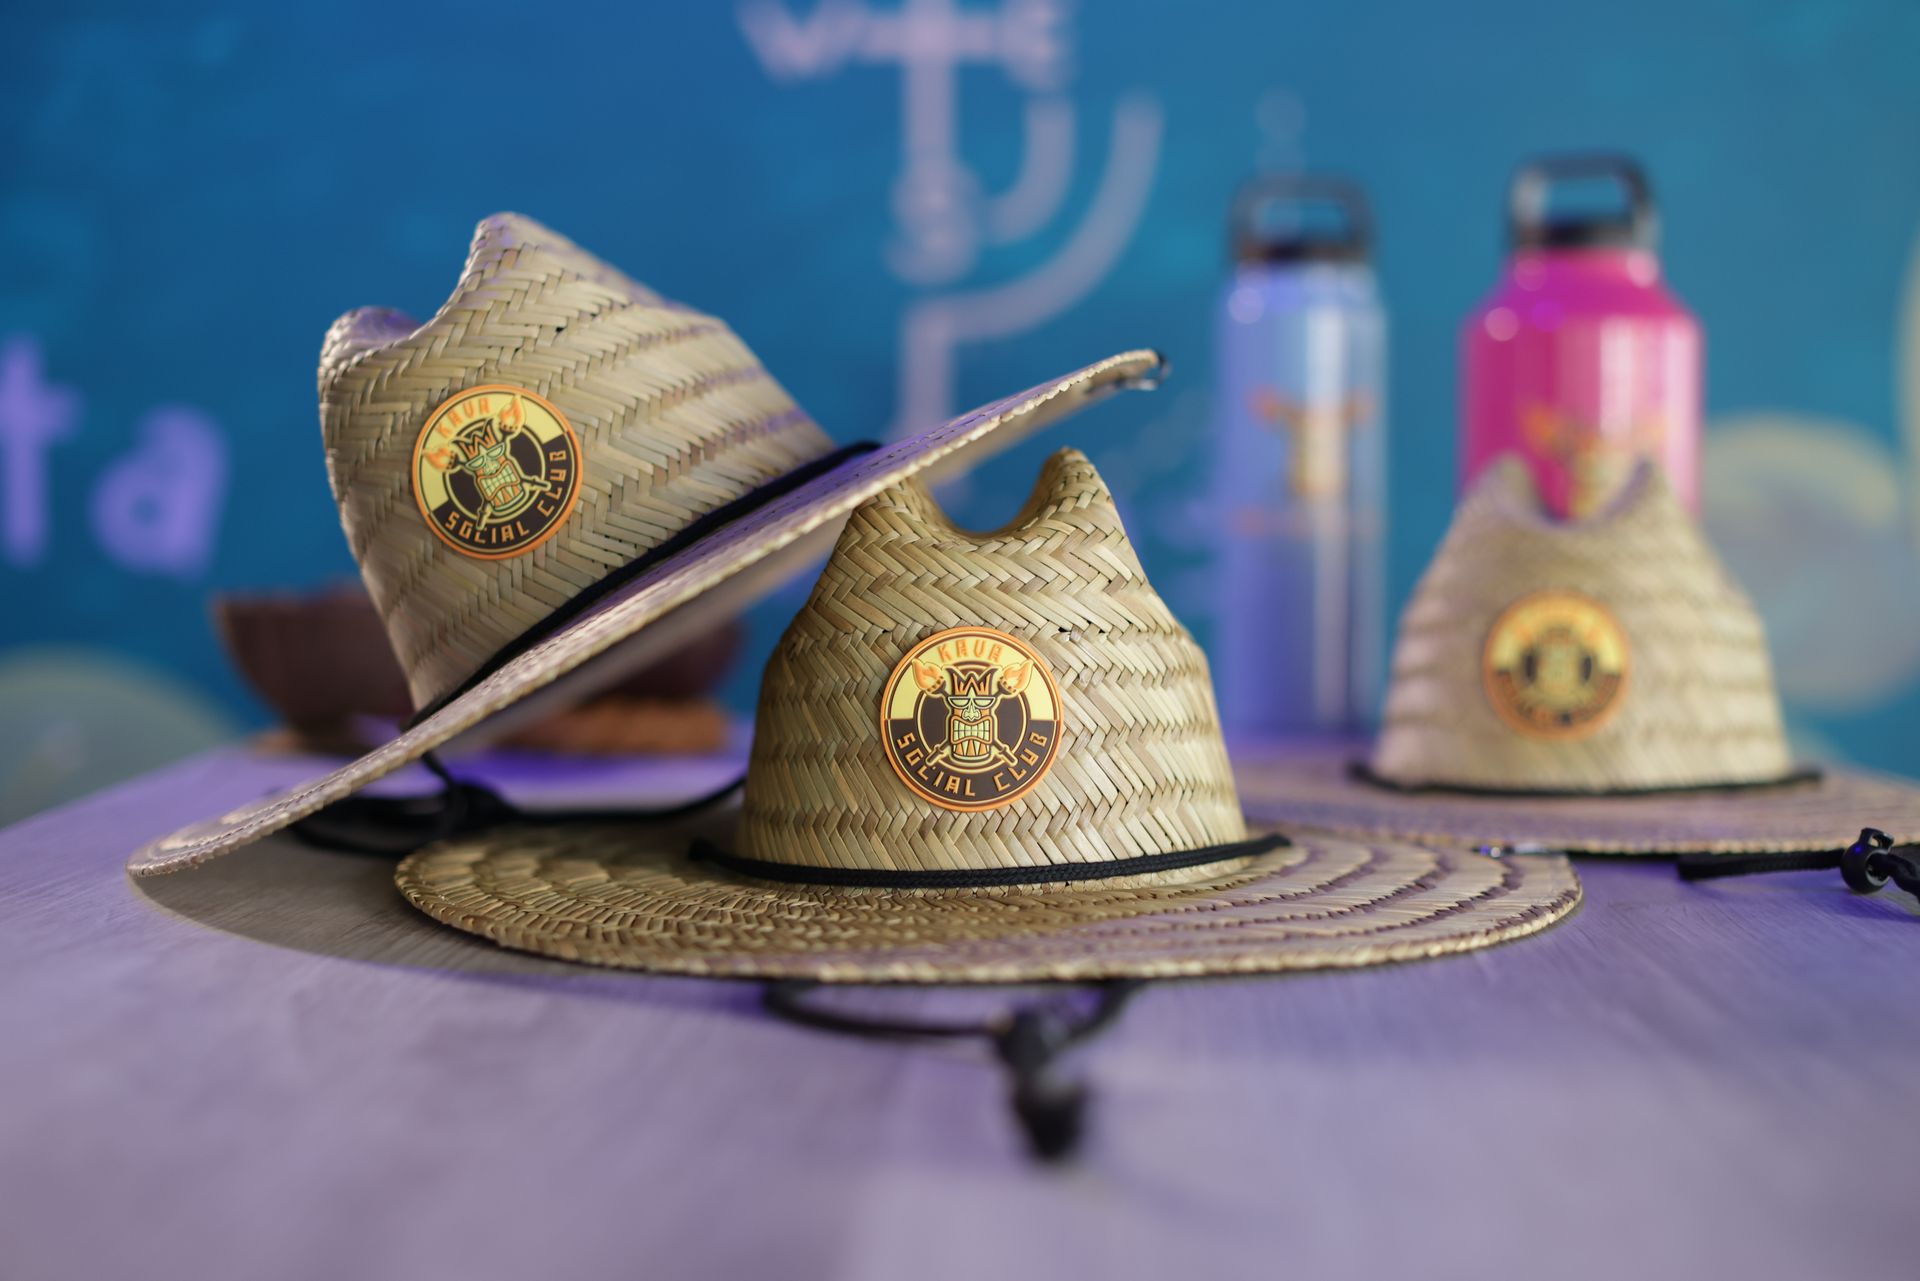 Three straw hats are sitting on a table next to water bottles.